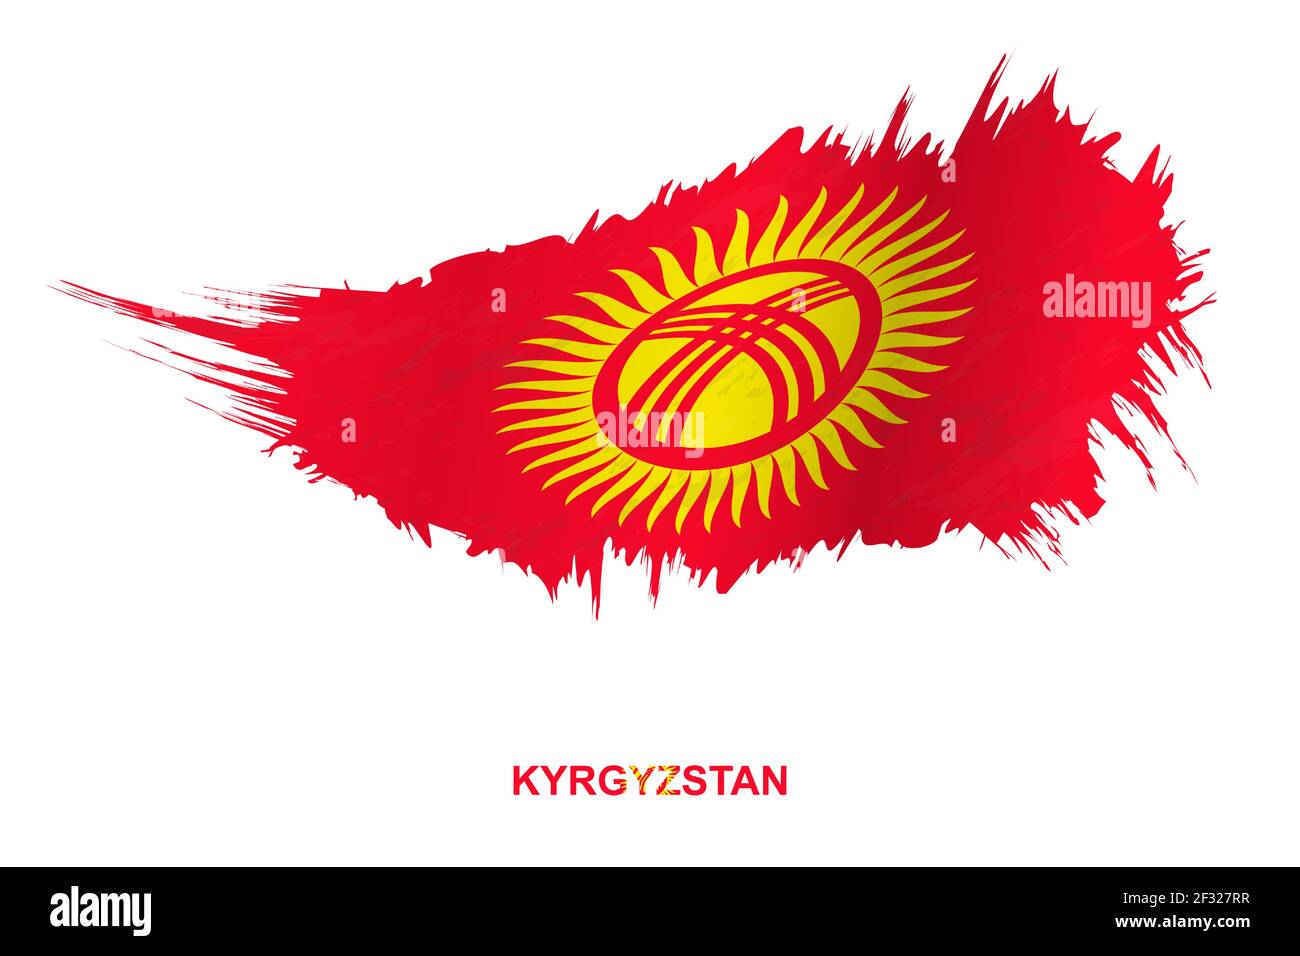 Flag of Kyrgyzstan in grunge style with waving effect, vector grunge brush stroke flag. Stock Vector